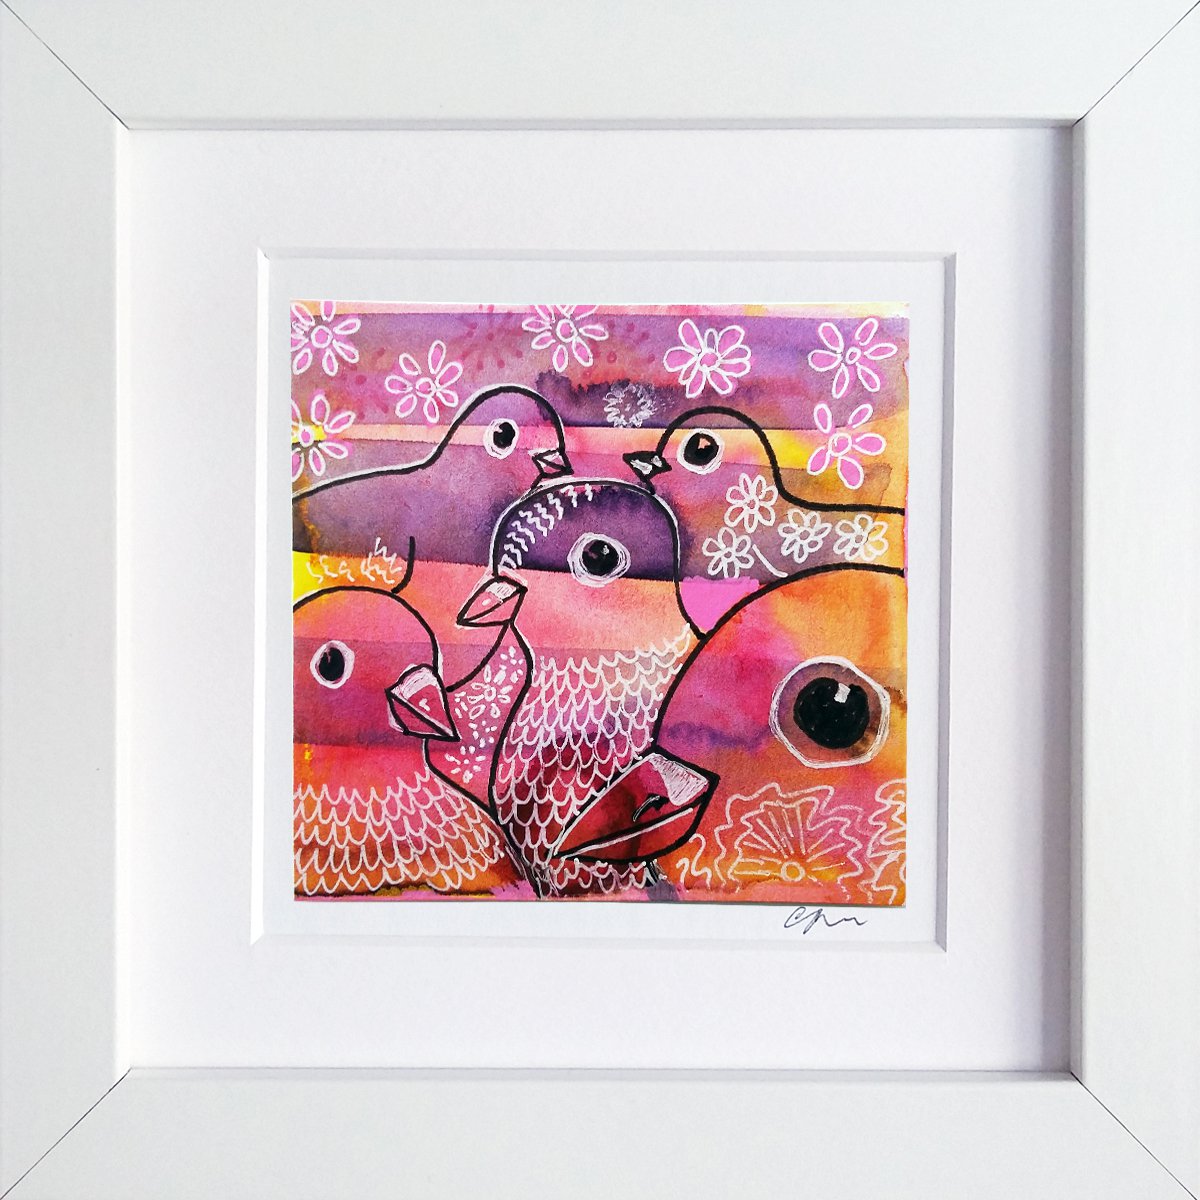 Feathered friends #3 (framed and ready to hang) by Carolynne Coulson